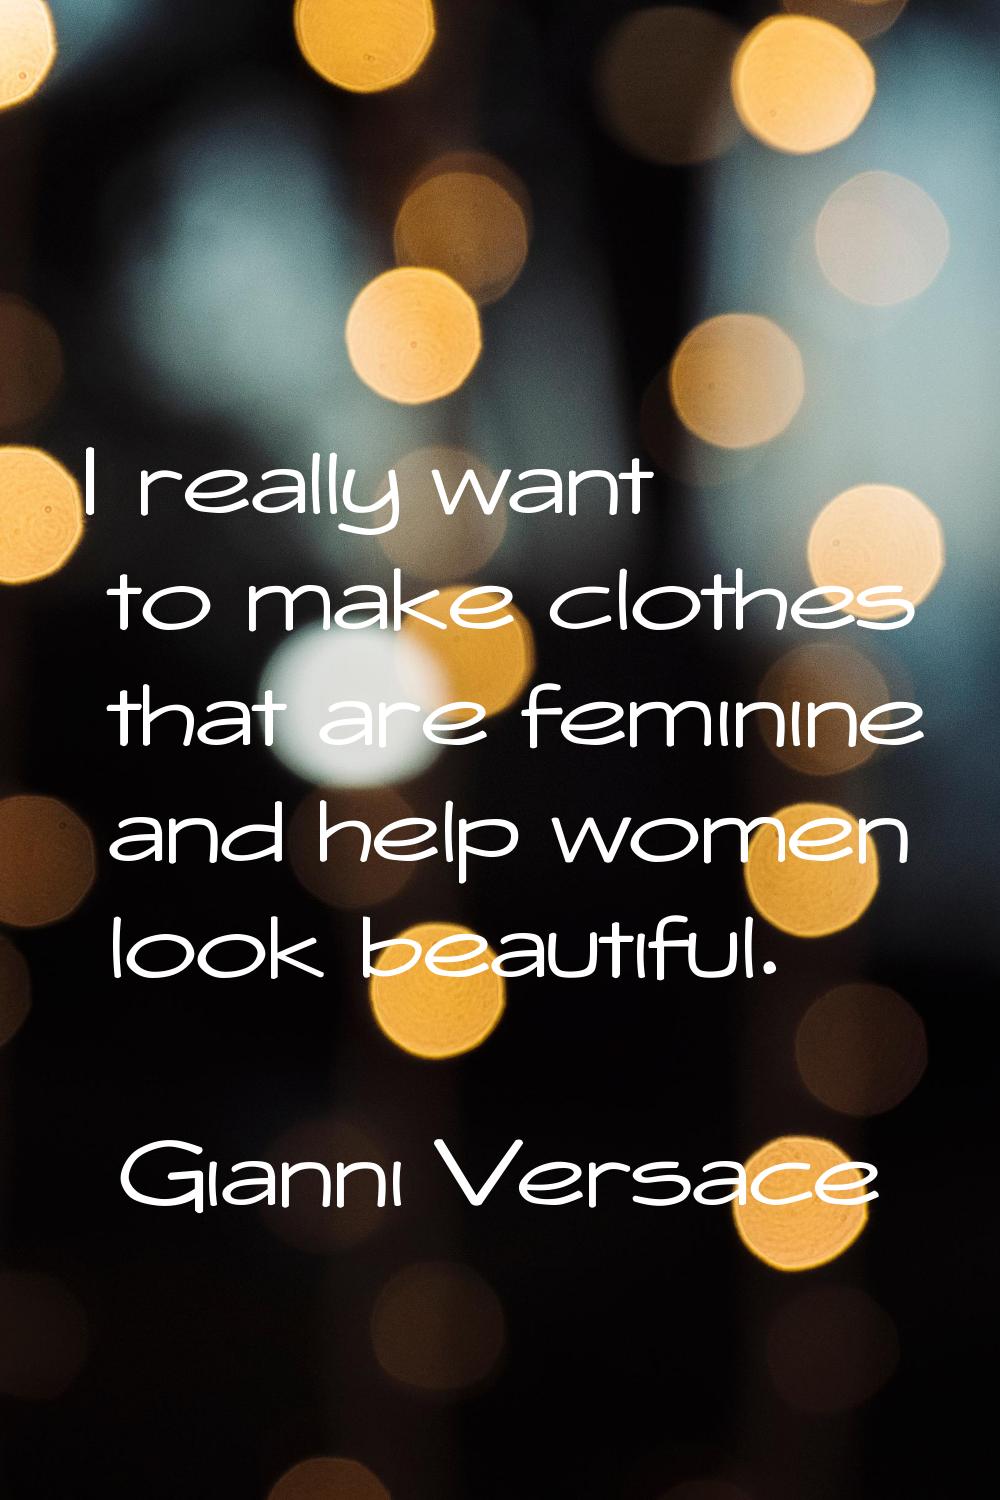 I really want to make clothes that are feminine and help women look beautiful.